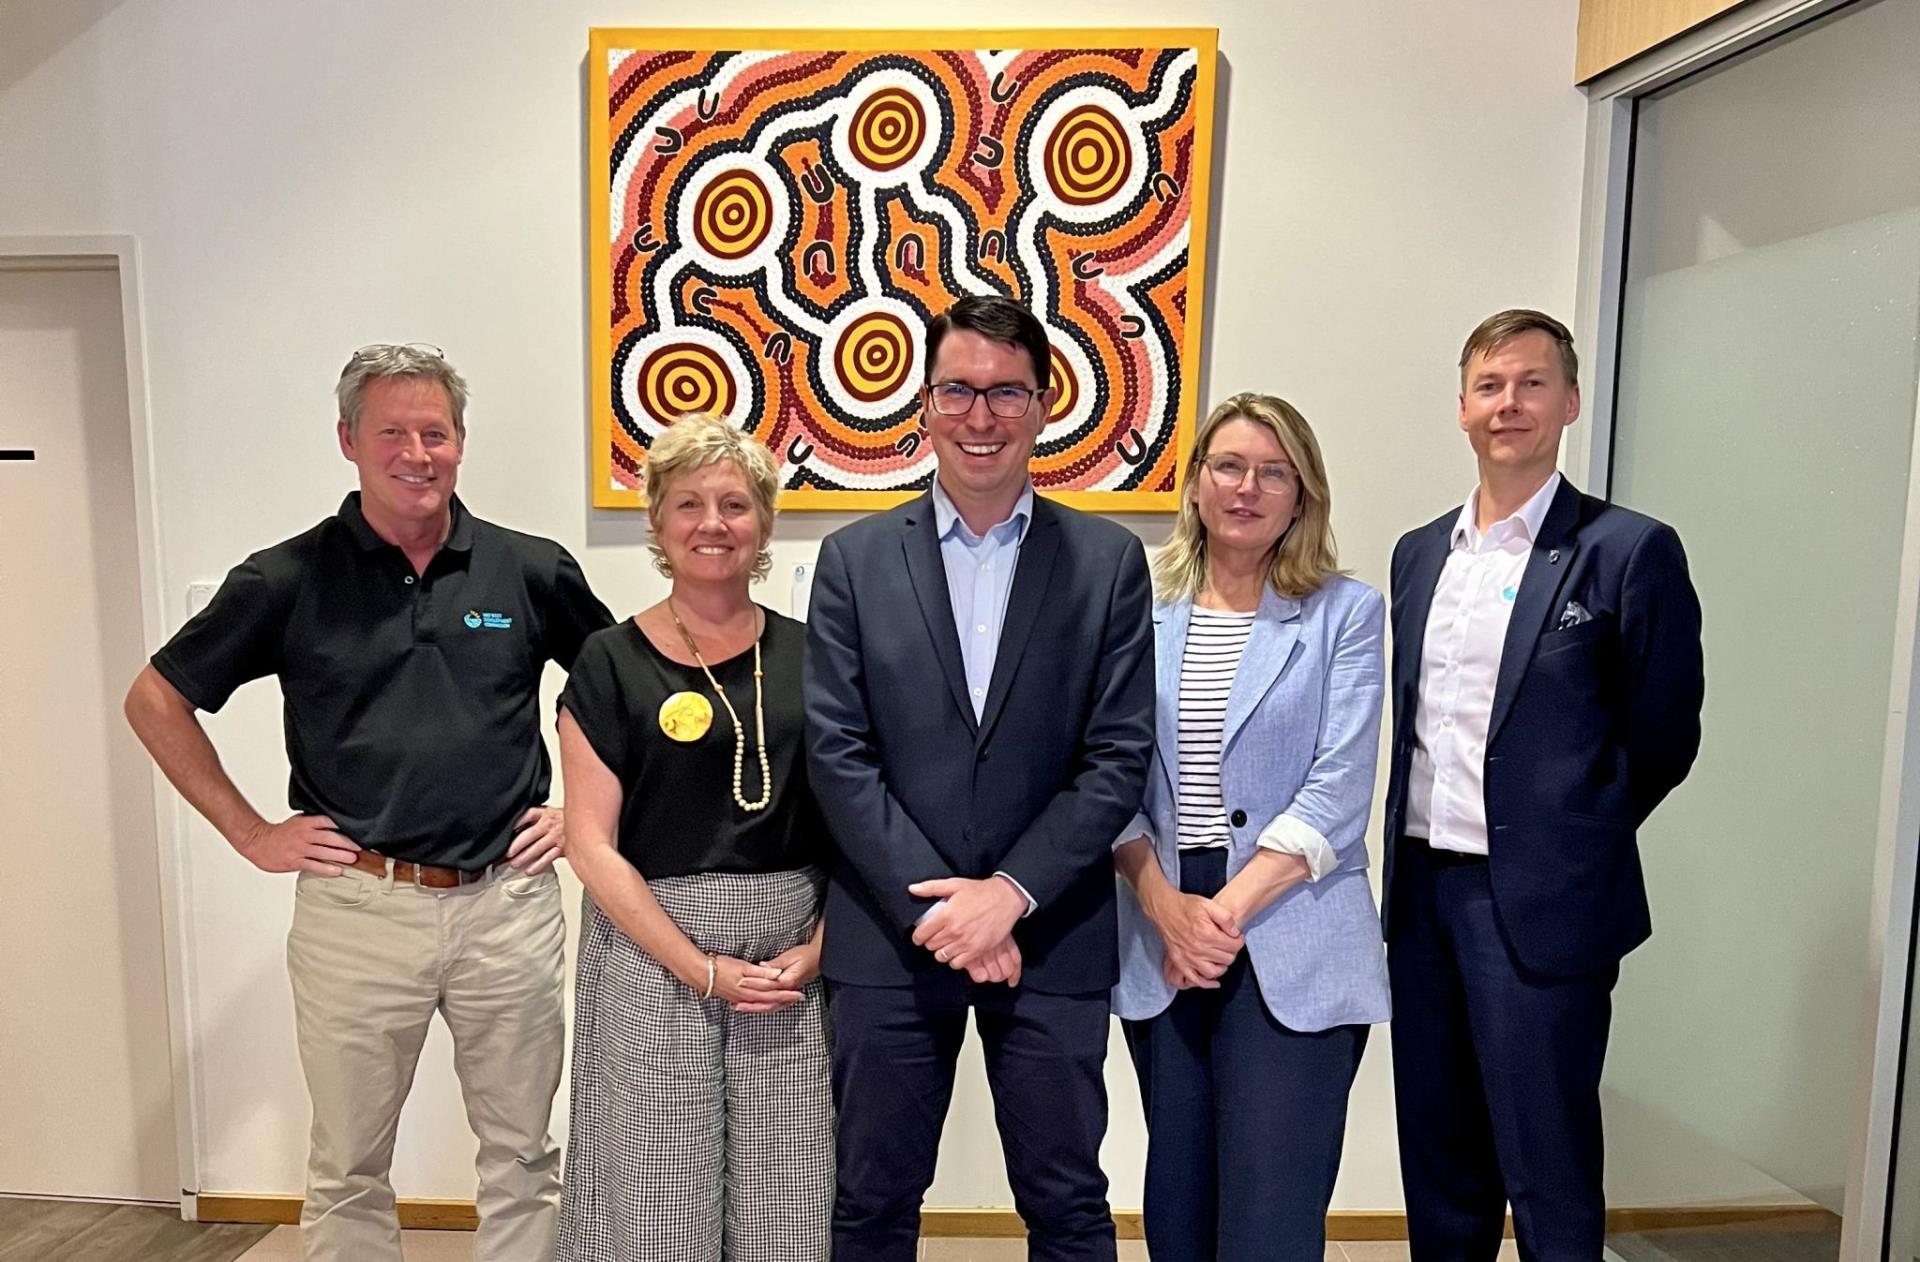 Assistant Minister to the Prime Minister visits Geraldton